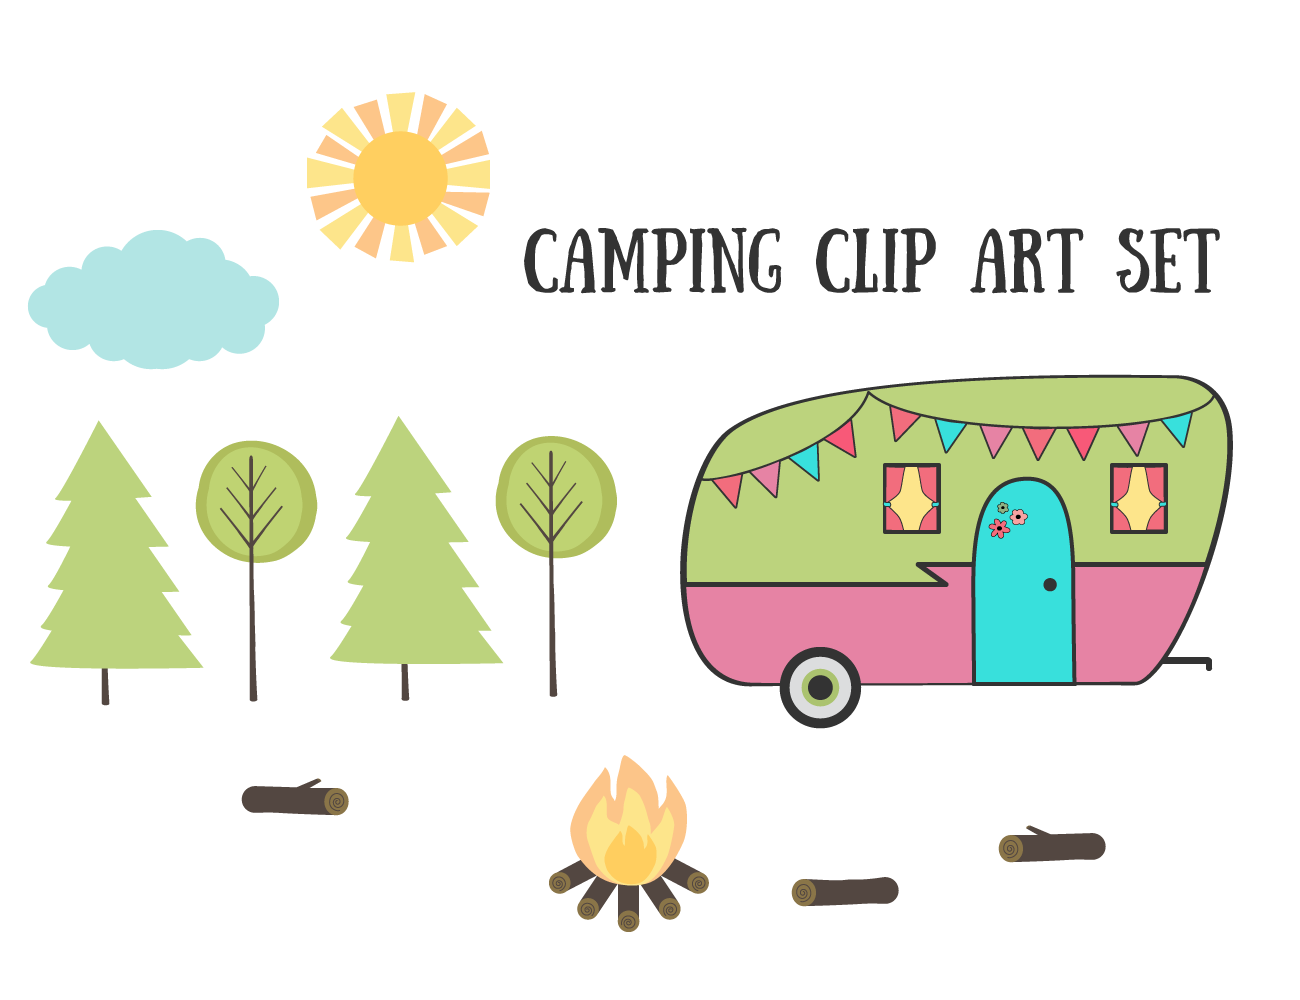 Royalty Free Images u2013 Cam - Free Camping Clip Art